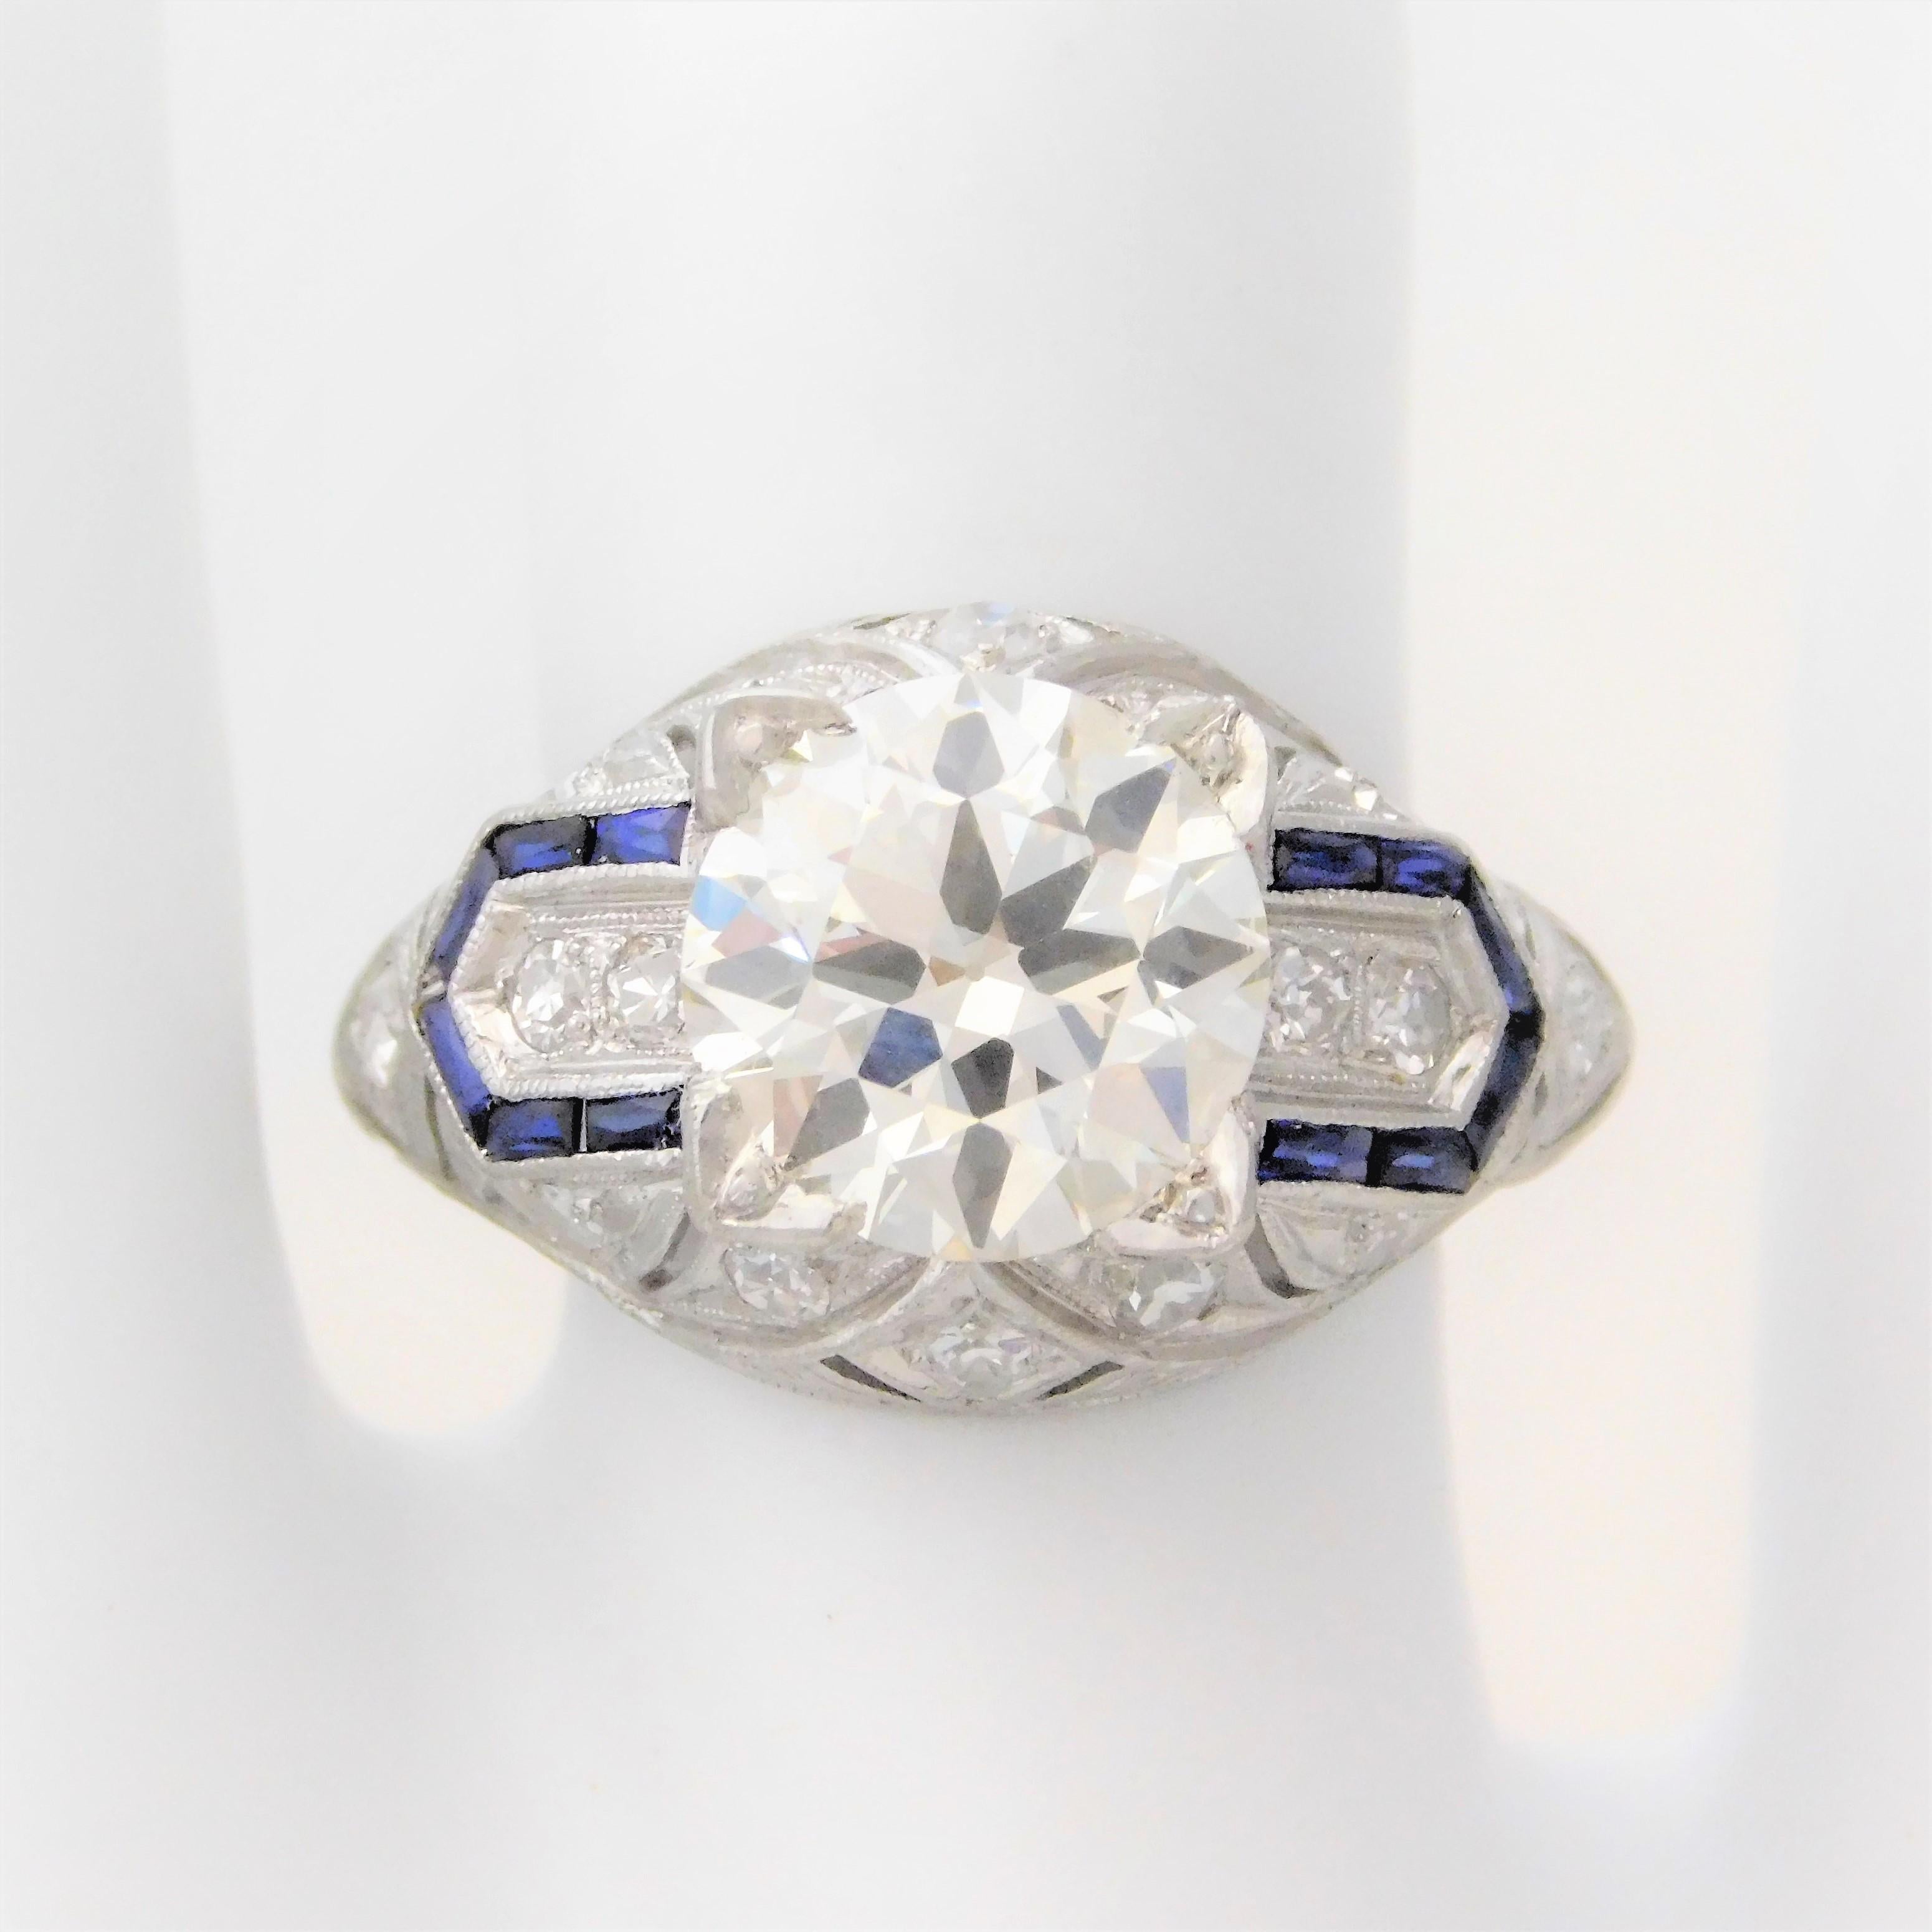 Art Deco 3.41carat Ladies’ Platinum Diamond and Sapphire Engagement Ring Circa 1930   
 
Art Deco, our favorite era in estate jewelry, is a style that emerged in 1925 as a result of exhibits at the World's Fair held in Paris, France. The term Art